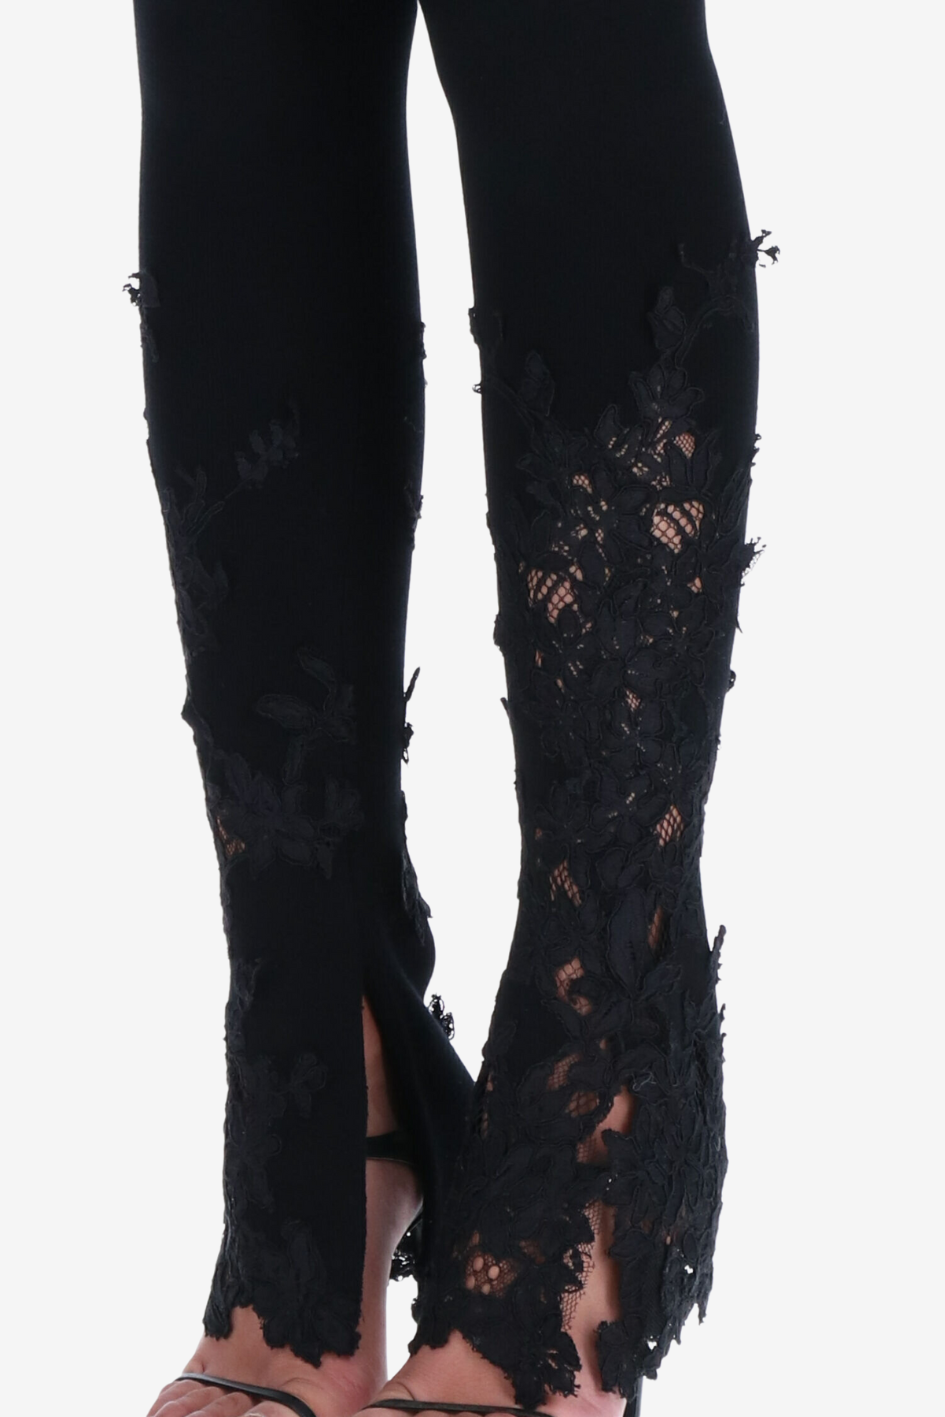 Leggings with Lace Detailing